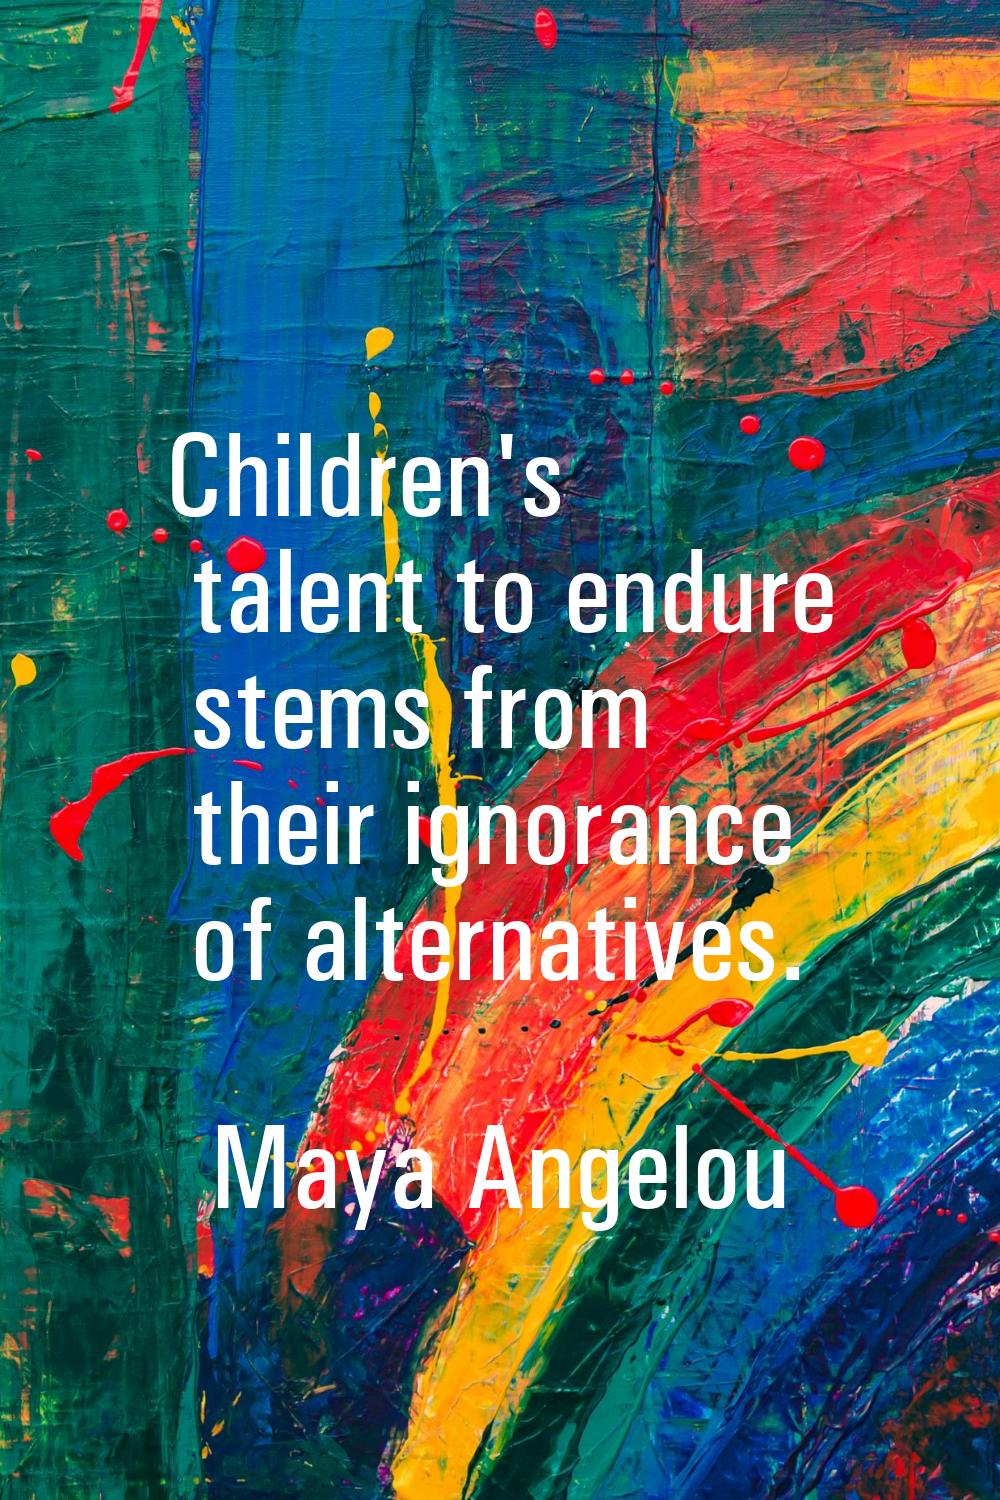 Children's talent to endure stems from their ignorance of alternatives.